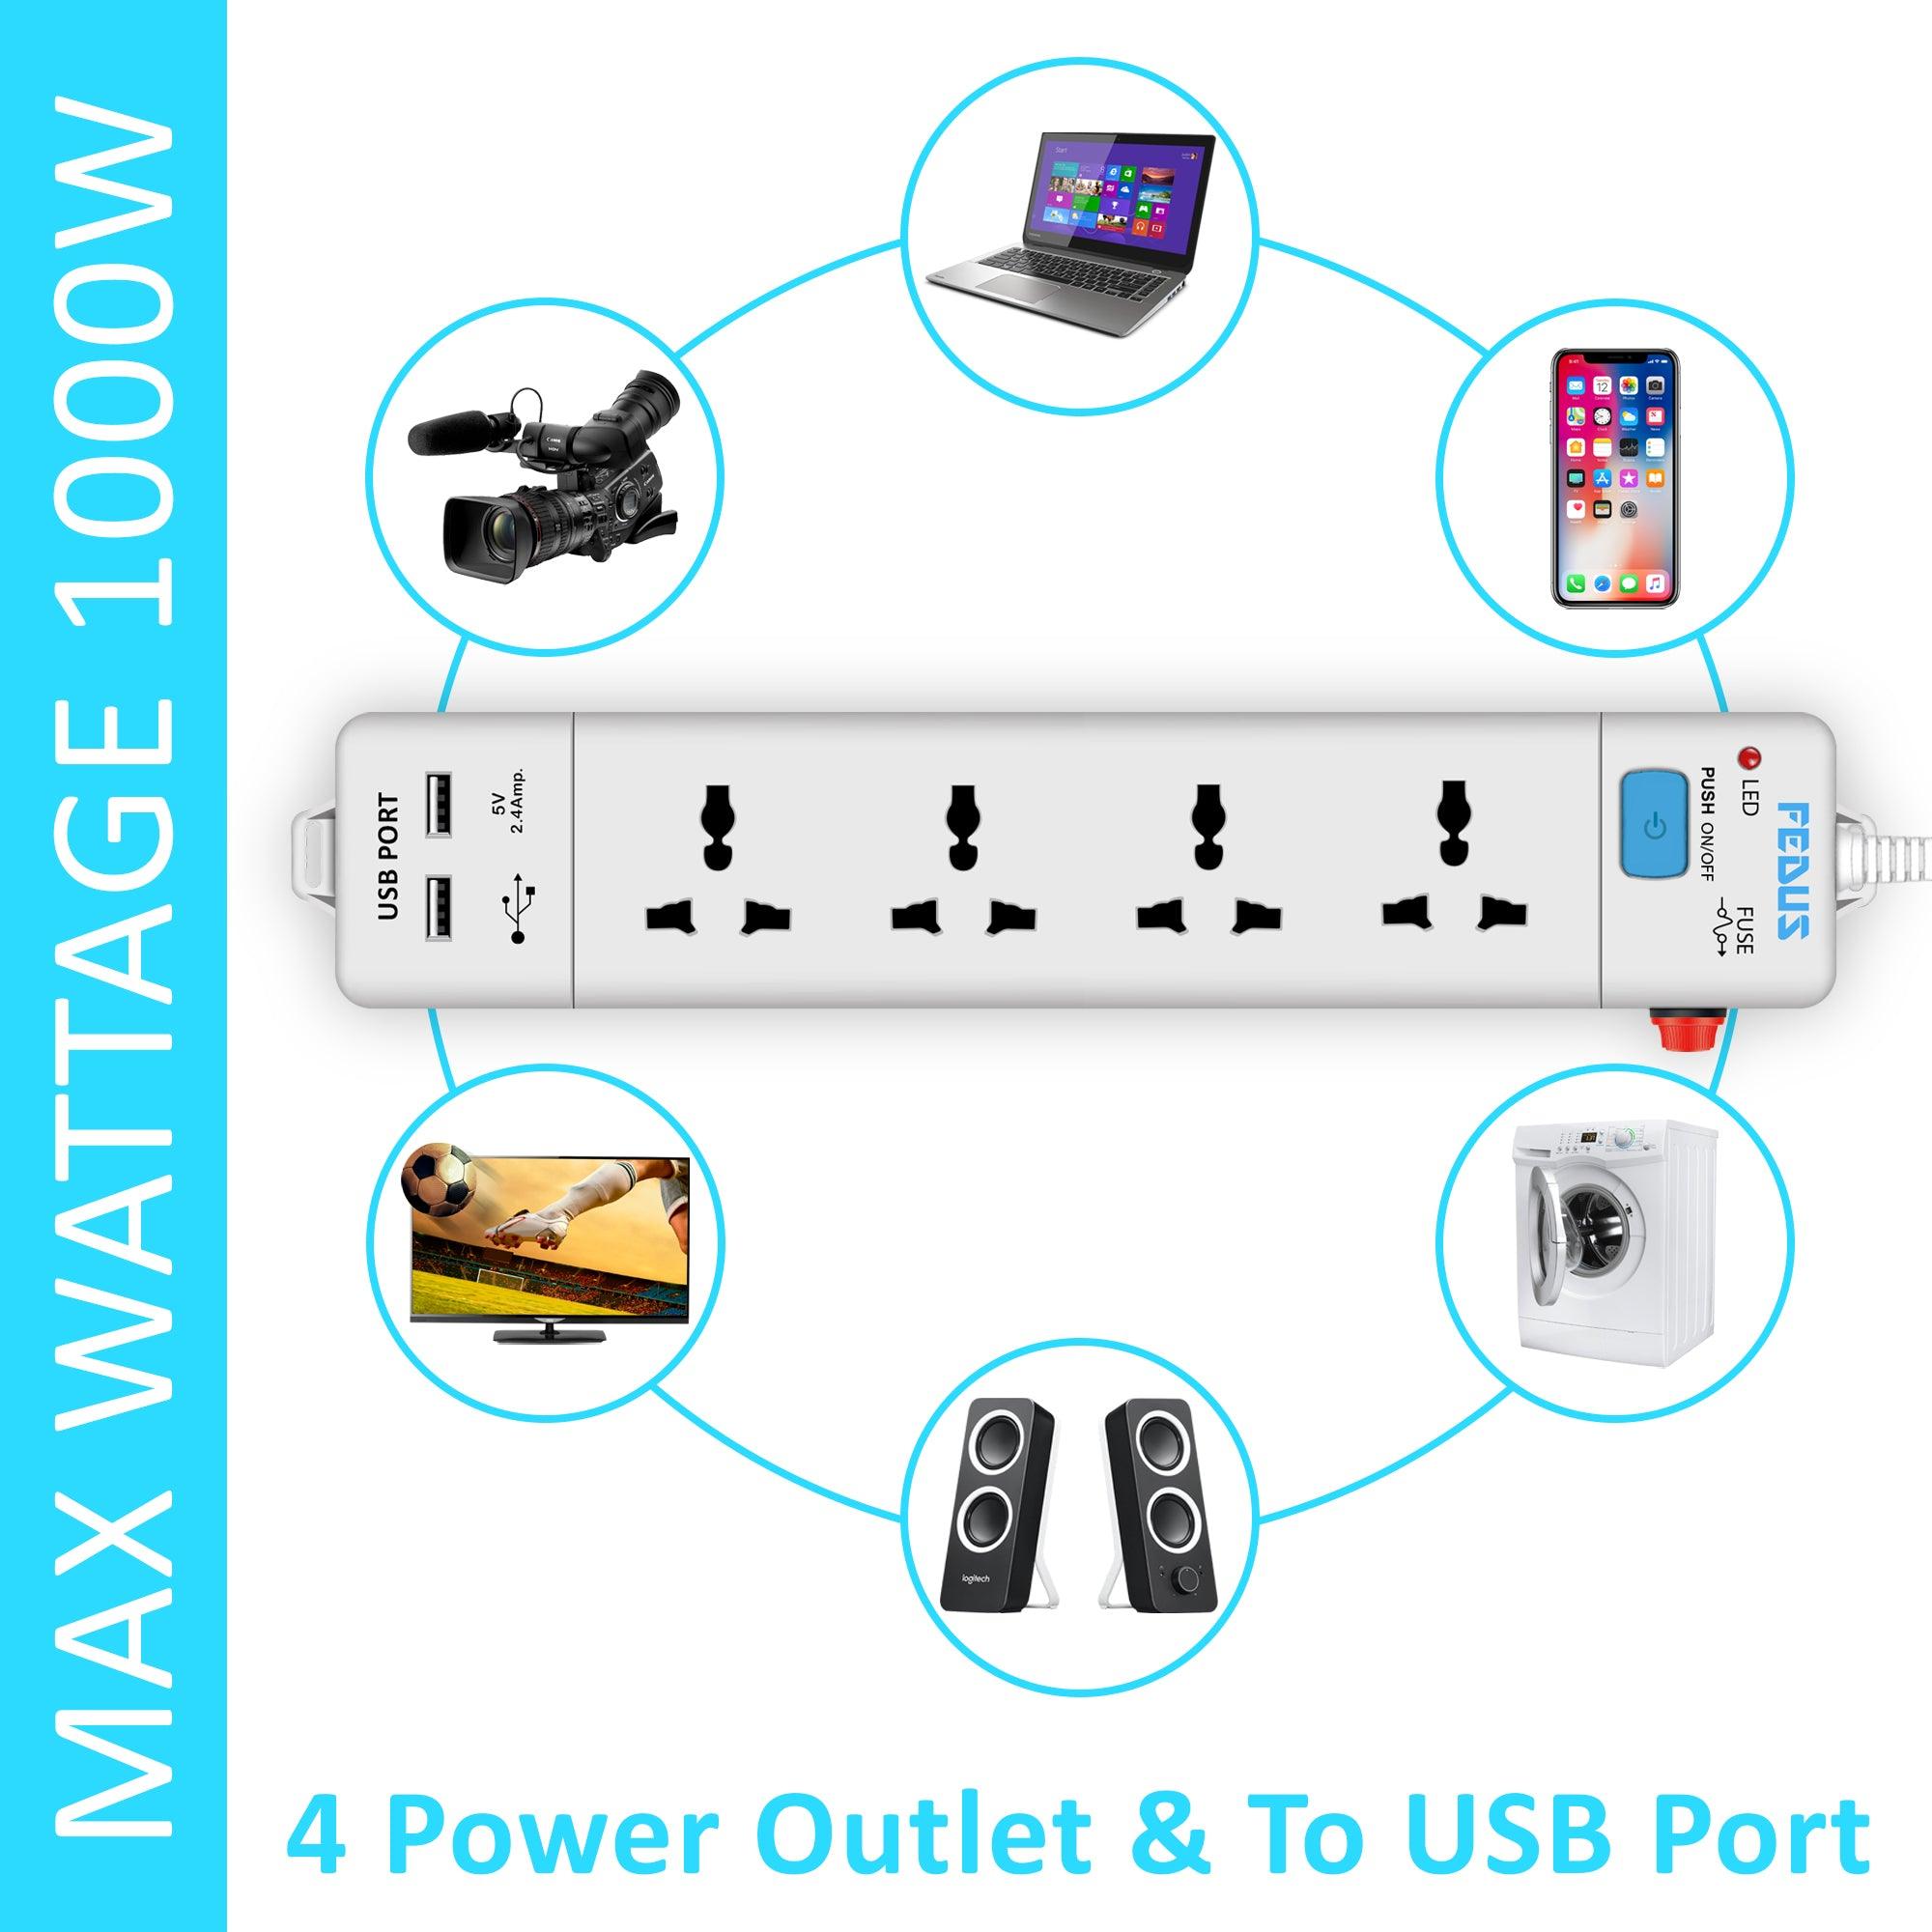 FEDUS Extension Board With 2 Output USB Charging Ports(2.1A ) 4 Universal Power Sockets, Switch Board Extension Board Cord, Power Strip, 3-Pin Surge Protection for Home Office - FEDUS